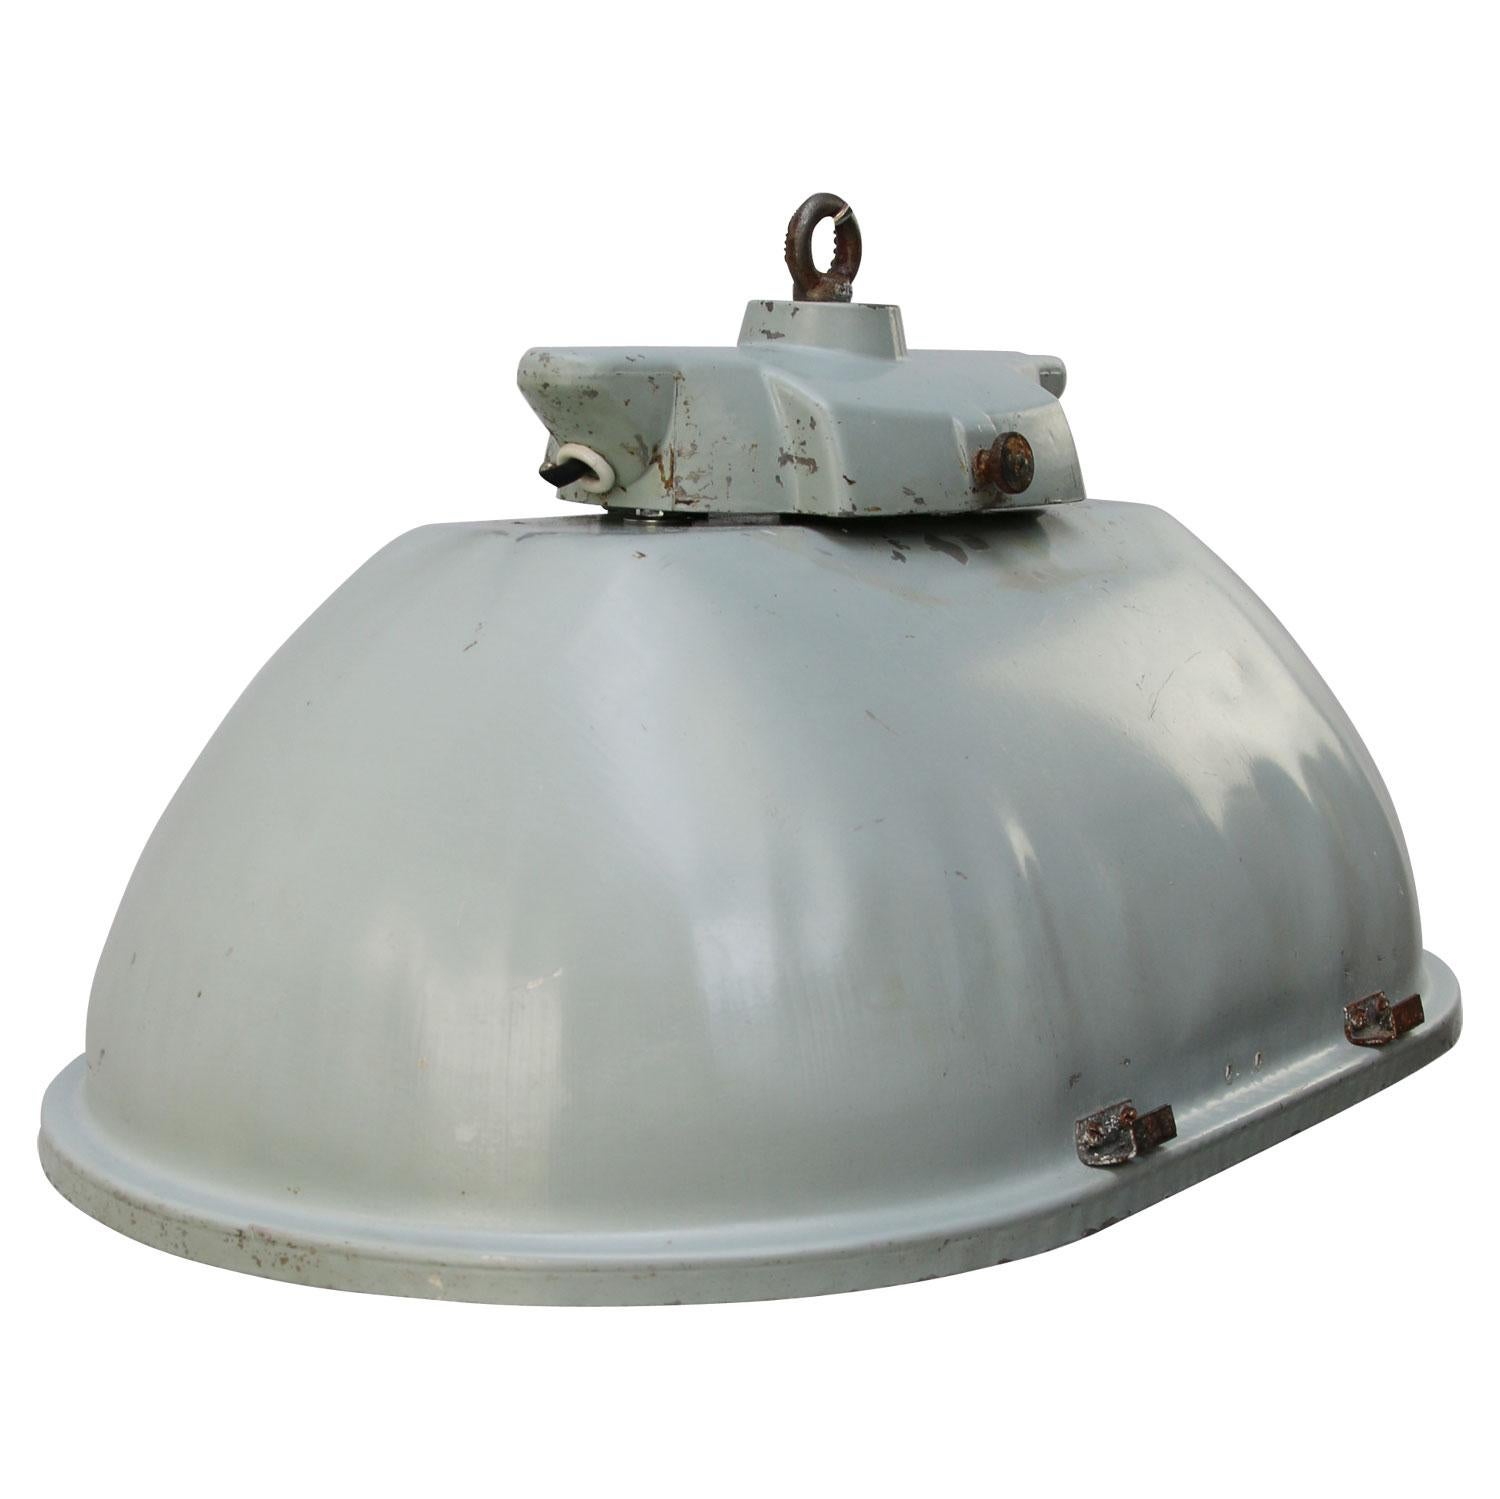 Double lights, two bulb holders
industrial hanging lamp
gray aluminum
white interior

Weight, 3.00 kg / 6.6 lb

Priced per individual item. All lamps have been made suitable by international standards for incandescent light bulbs,